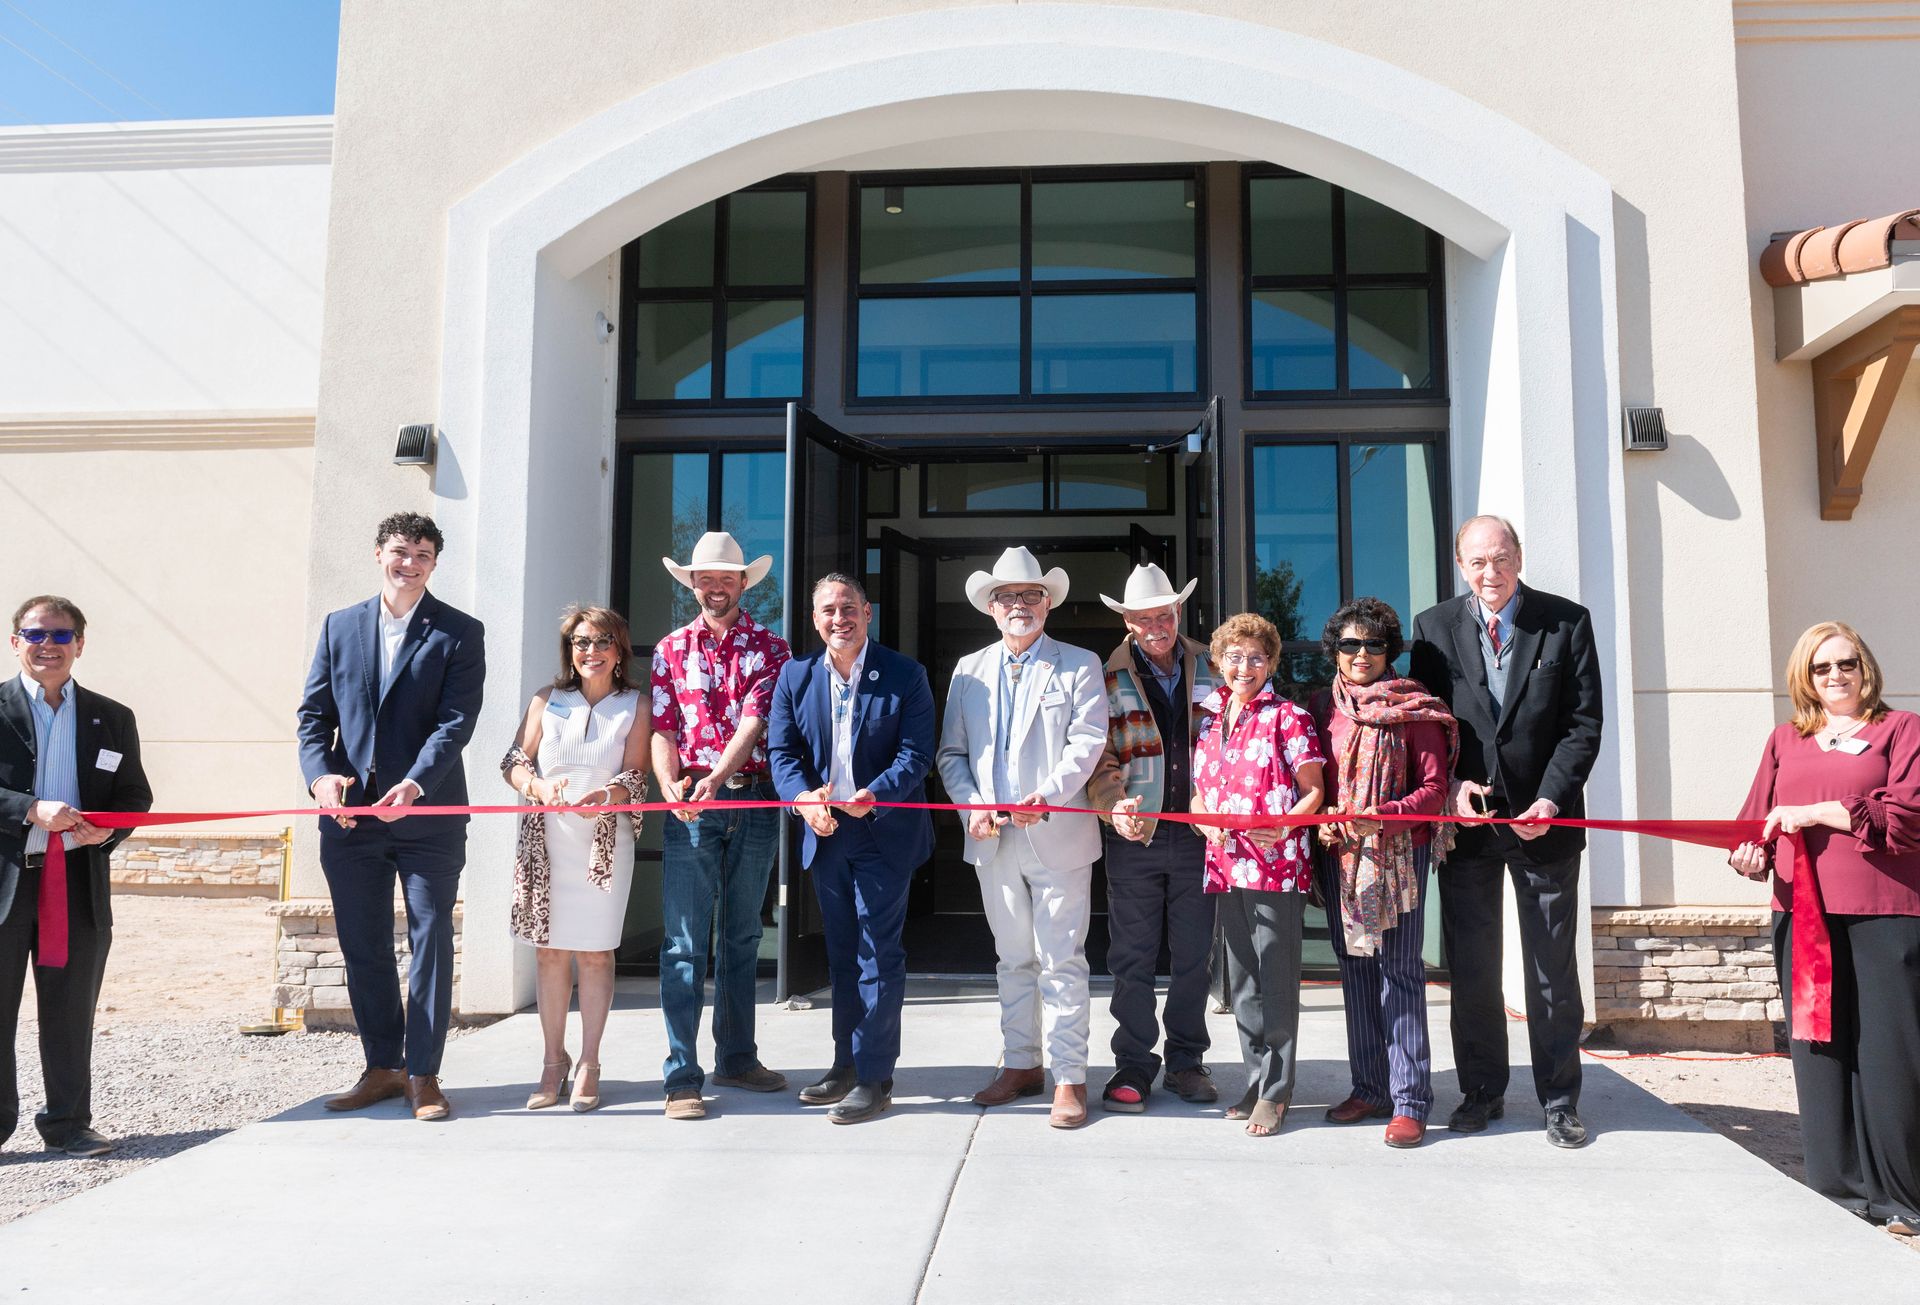 This morning the NMSU College of Agricultural, Consumer and Environmental Sciences celebrated the completion of the Food Science, Security and Safety Center and the Animal Nutrition and Feed Manufacturing Facility with a ribbon-cutting ceremony.